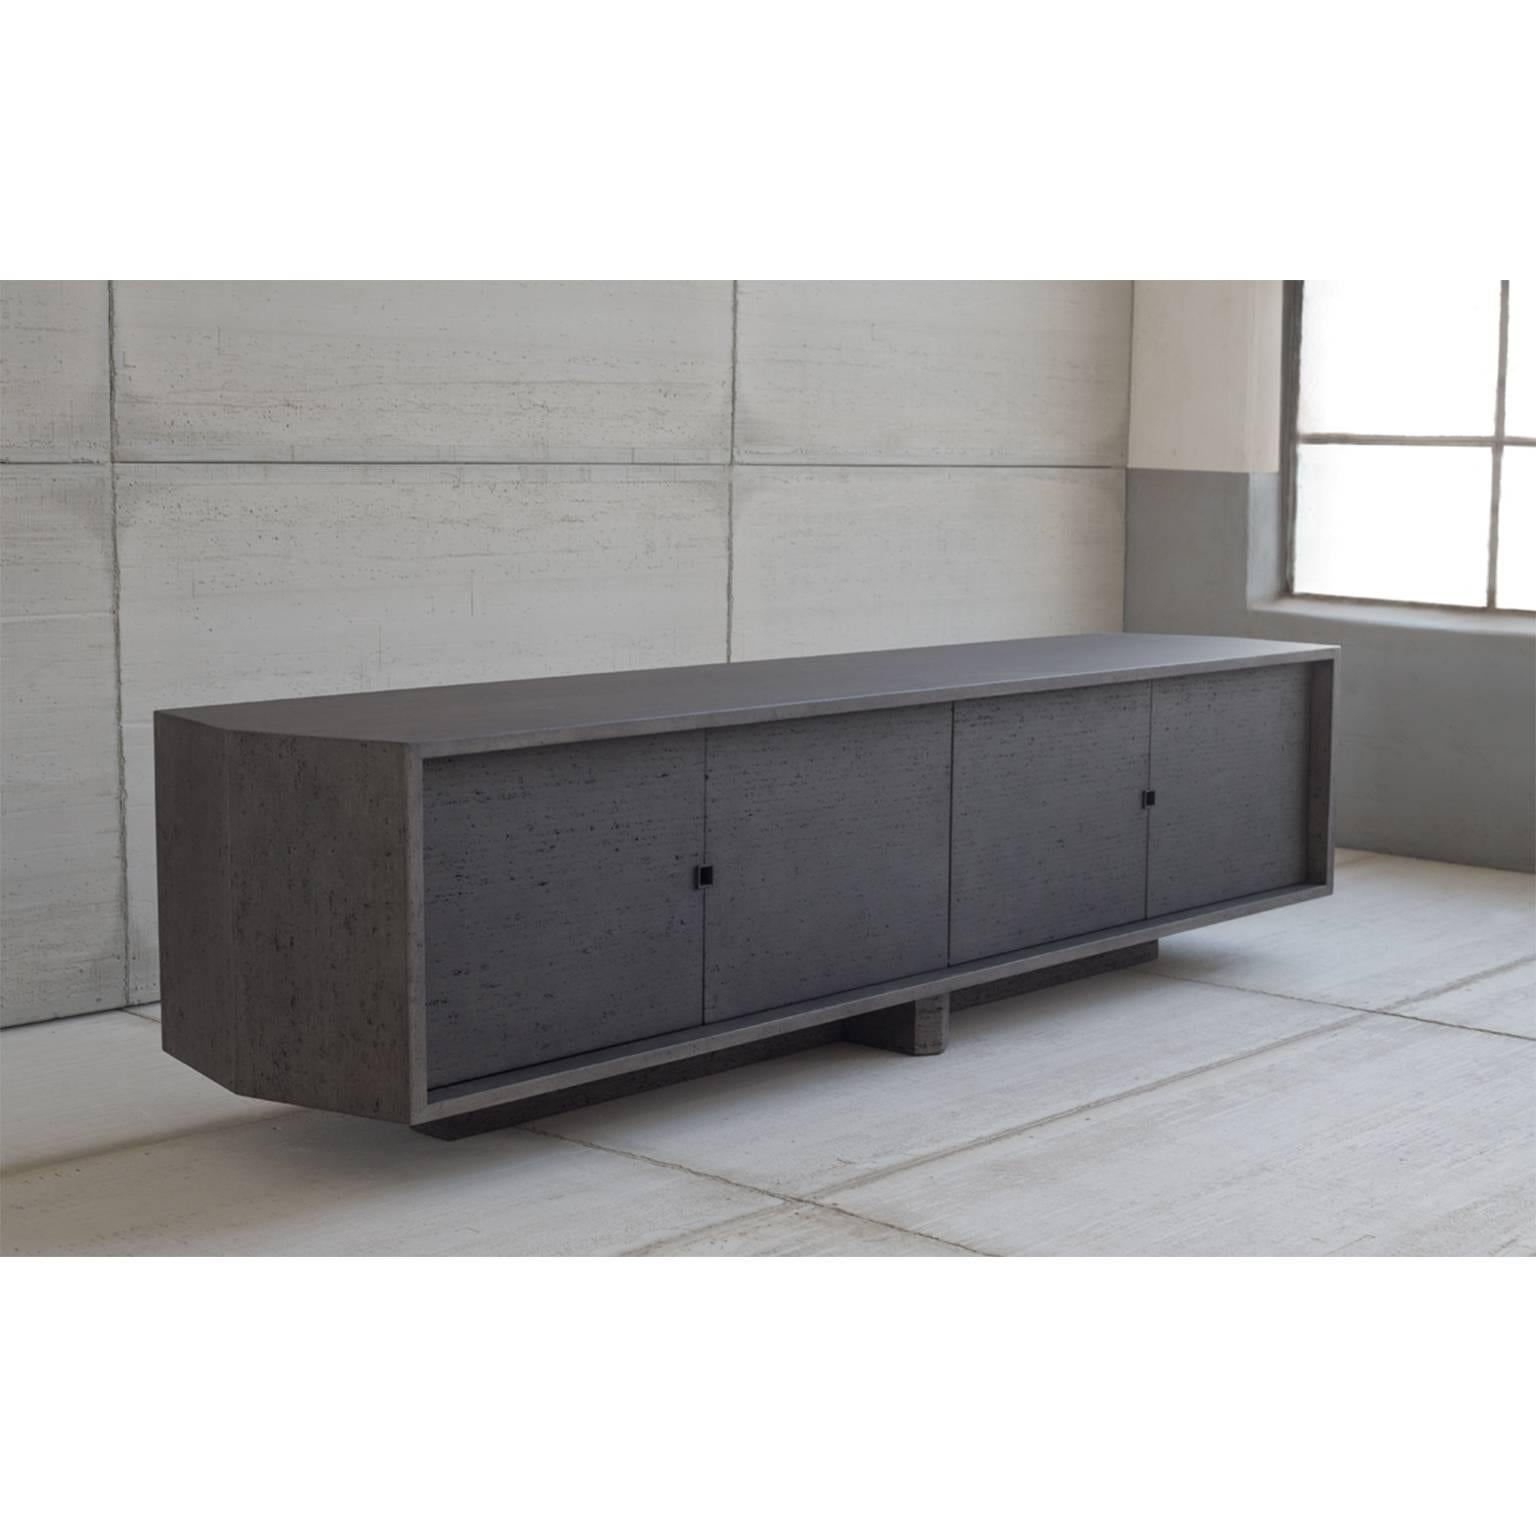 Contemporary Struttura Credenza by May Furniture